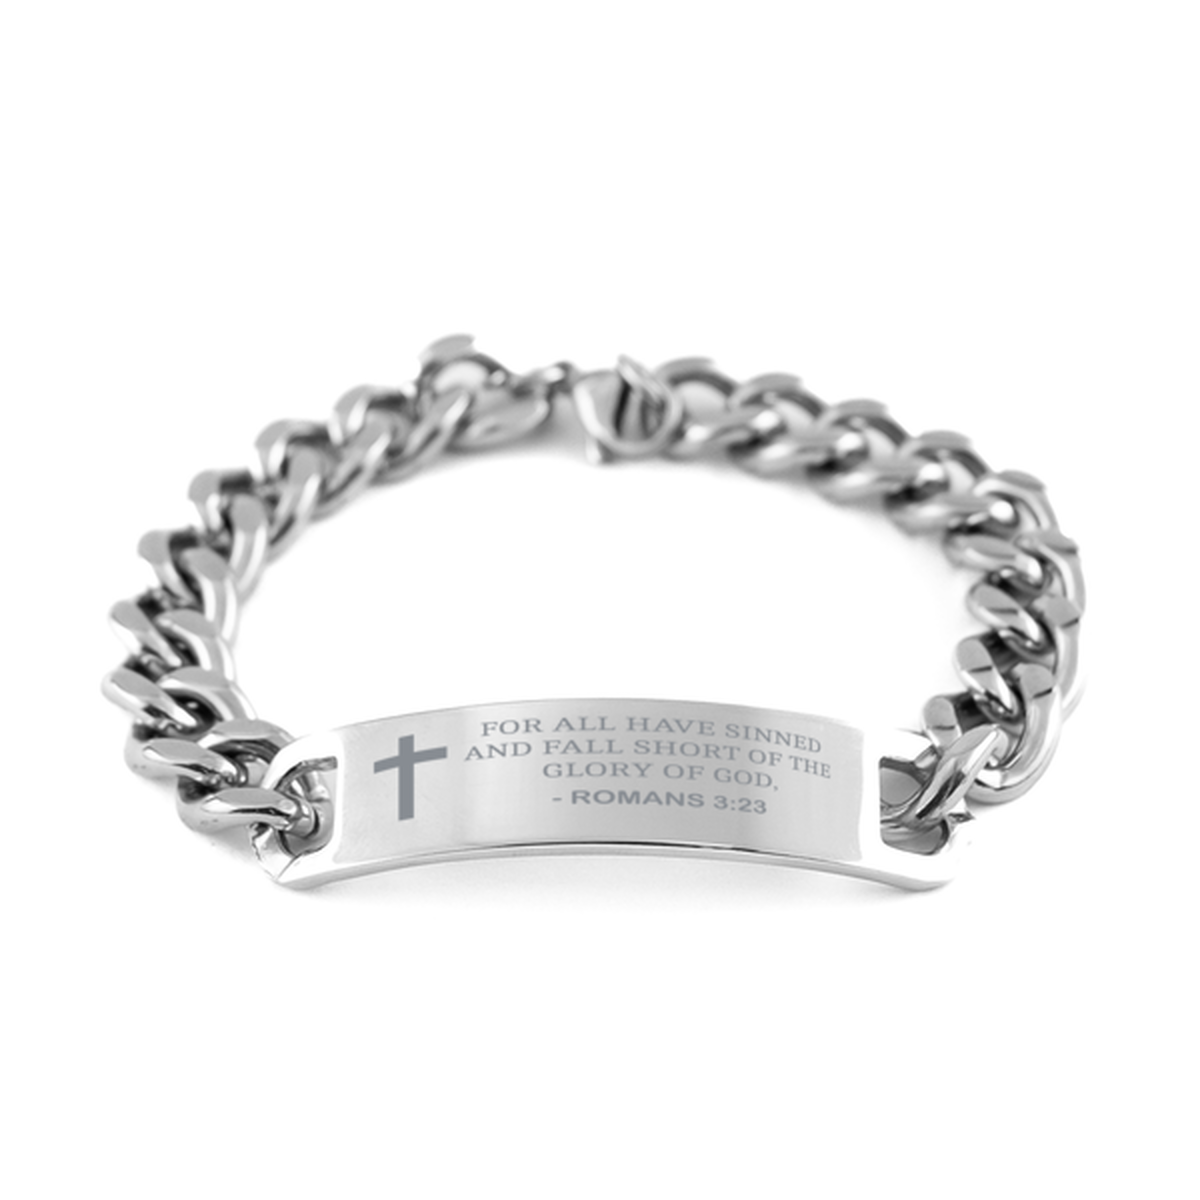 Bible Verse Chain Stainless Steel Bracelet, Romans 3:23 For All Have Sinned And Fall Short Of The Glory, Inspirational Christian Gifts For Men Women